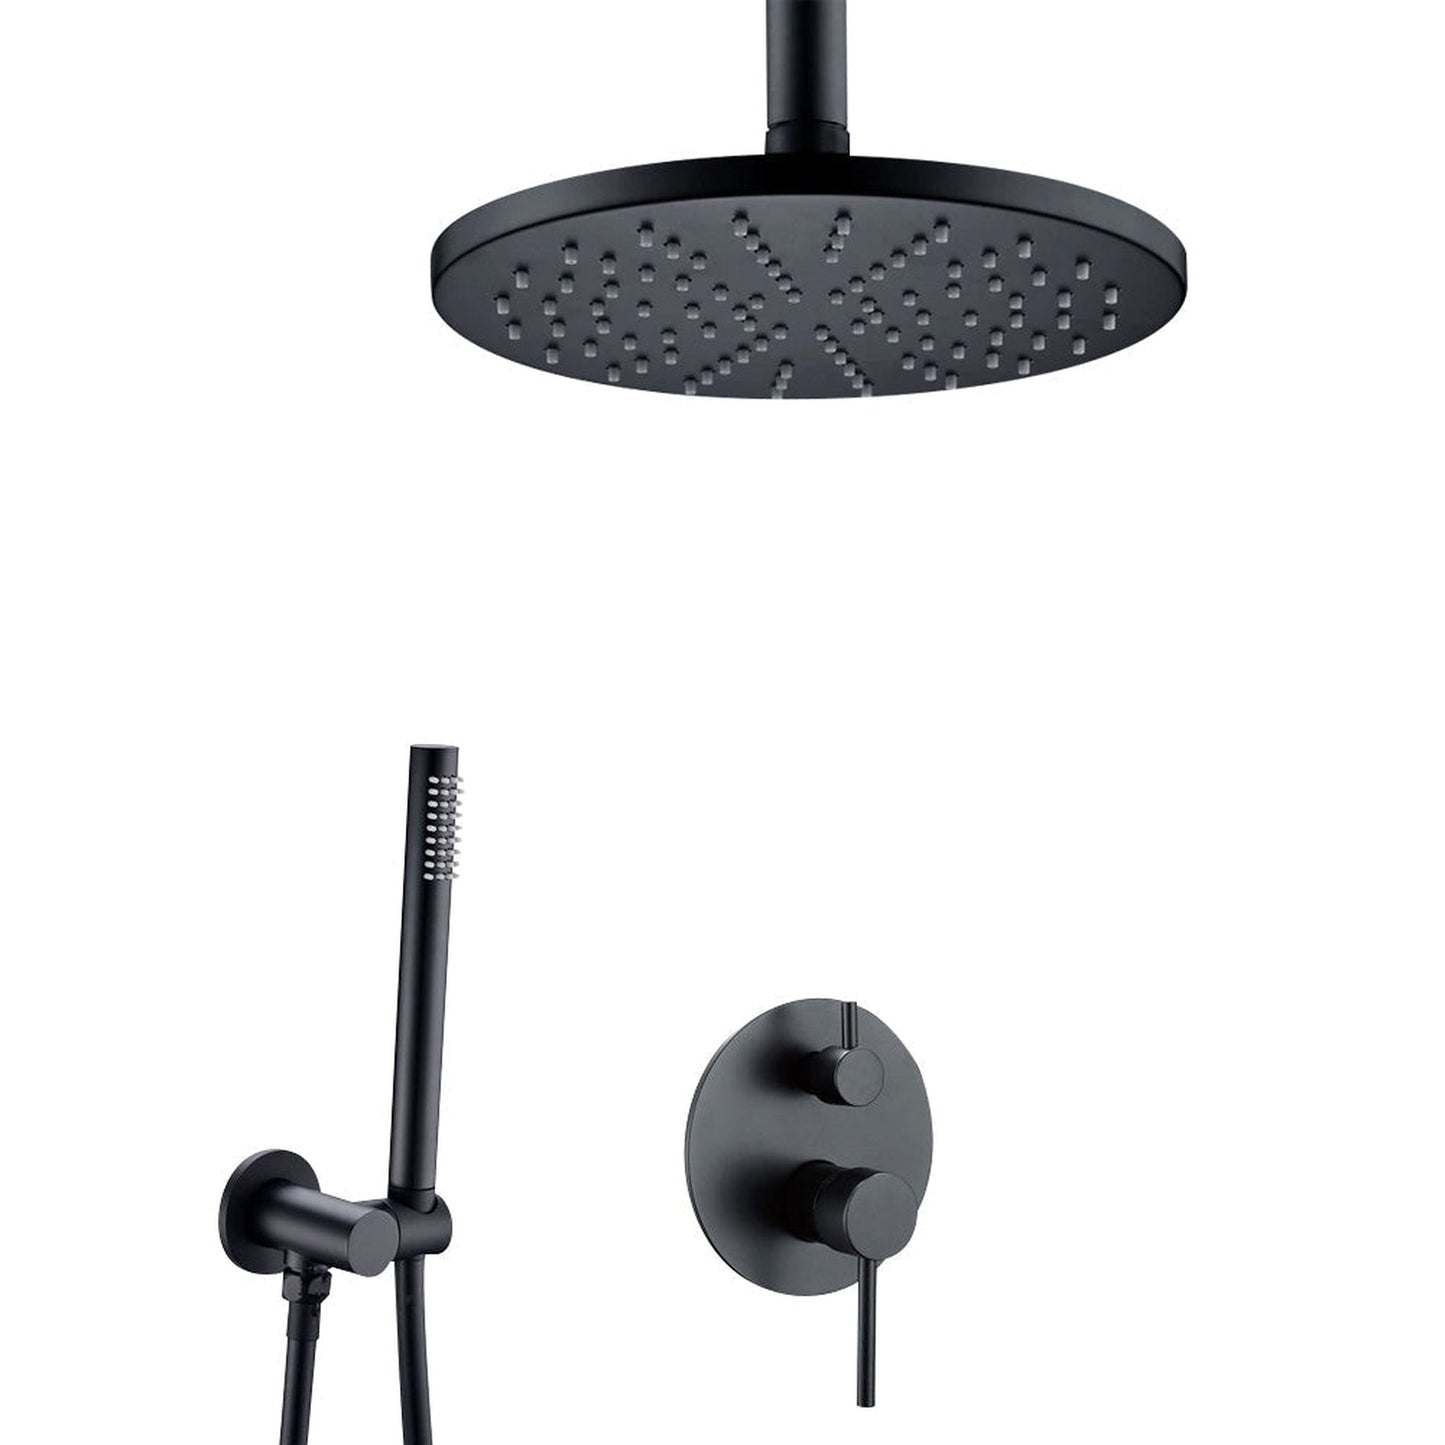 FontanaShowers Verona Creative Luxury 12" Dark Oil Rubbed Bronze Round Ceiling Mounted Shower Head Hot and Cold Mixer Rainfall Shower System With Hand Shower